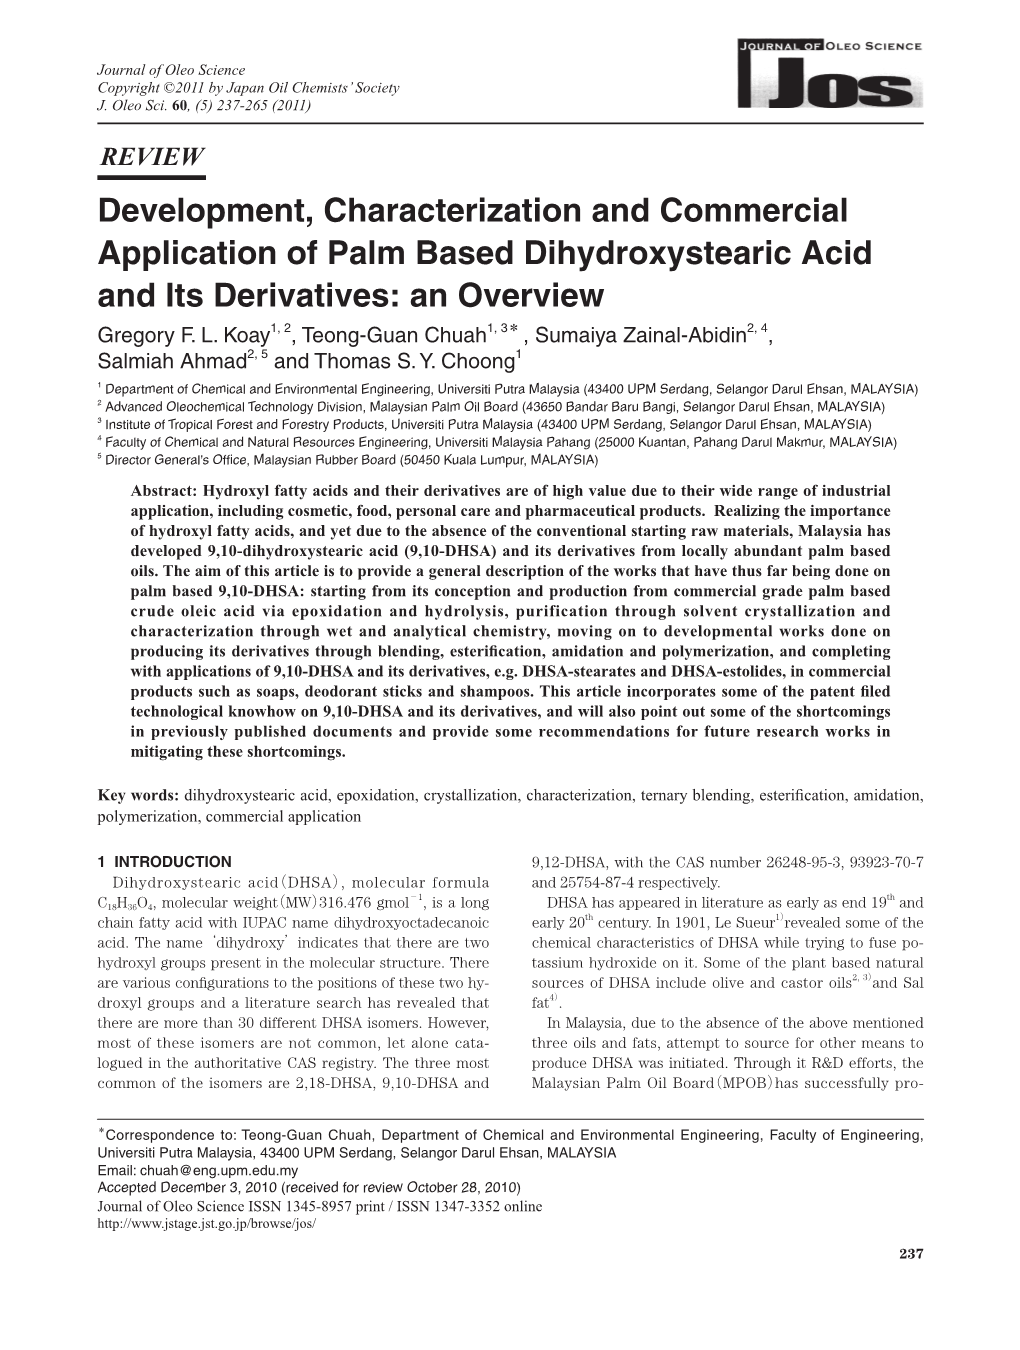 Development, Characterization and Commercial Application of Palm Based Dihydroxystearic Acid and Its Derivatives: an Overview Gregory F